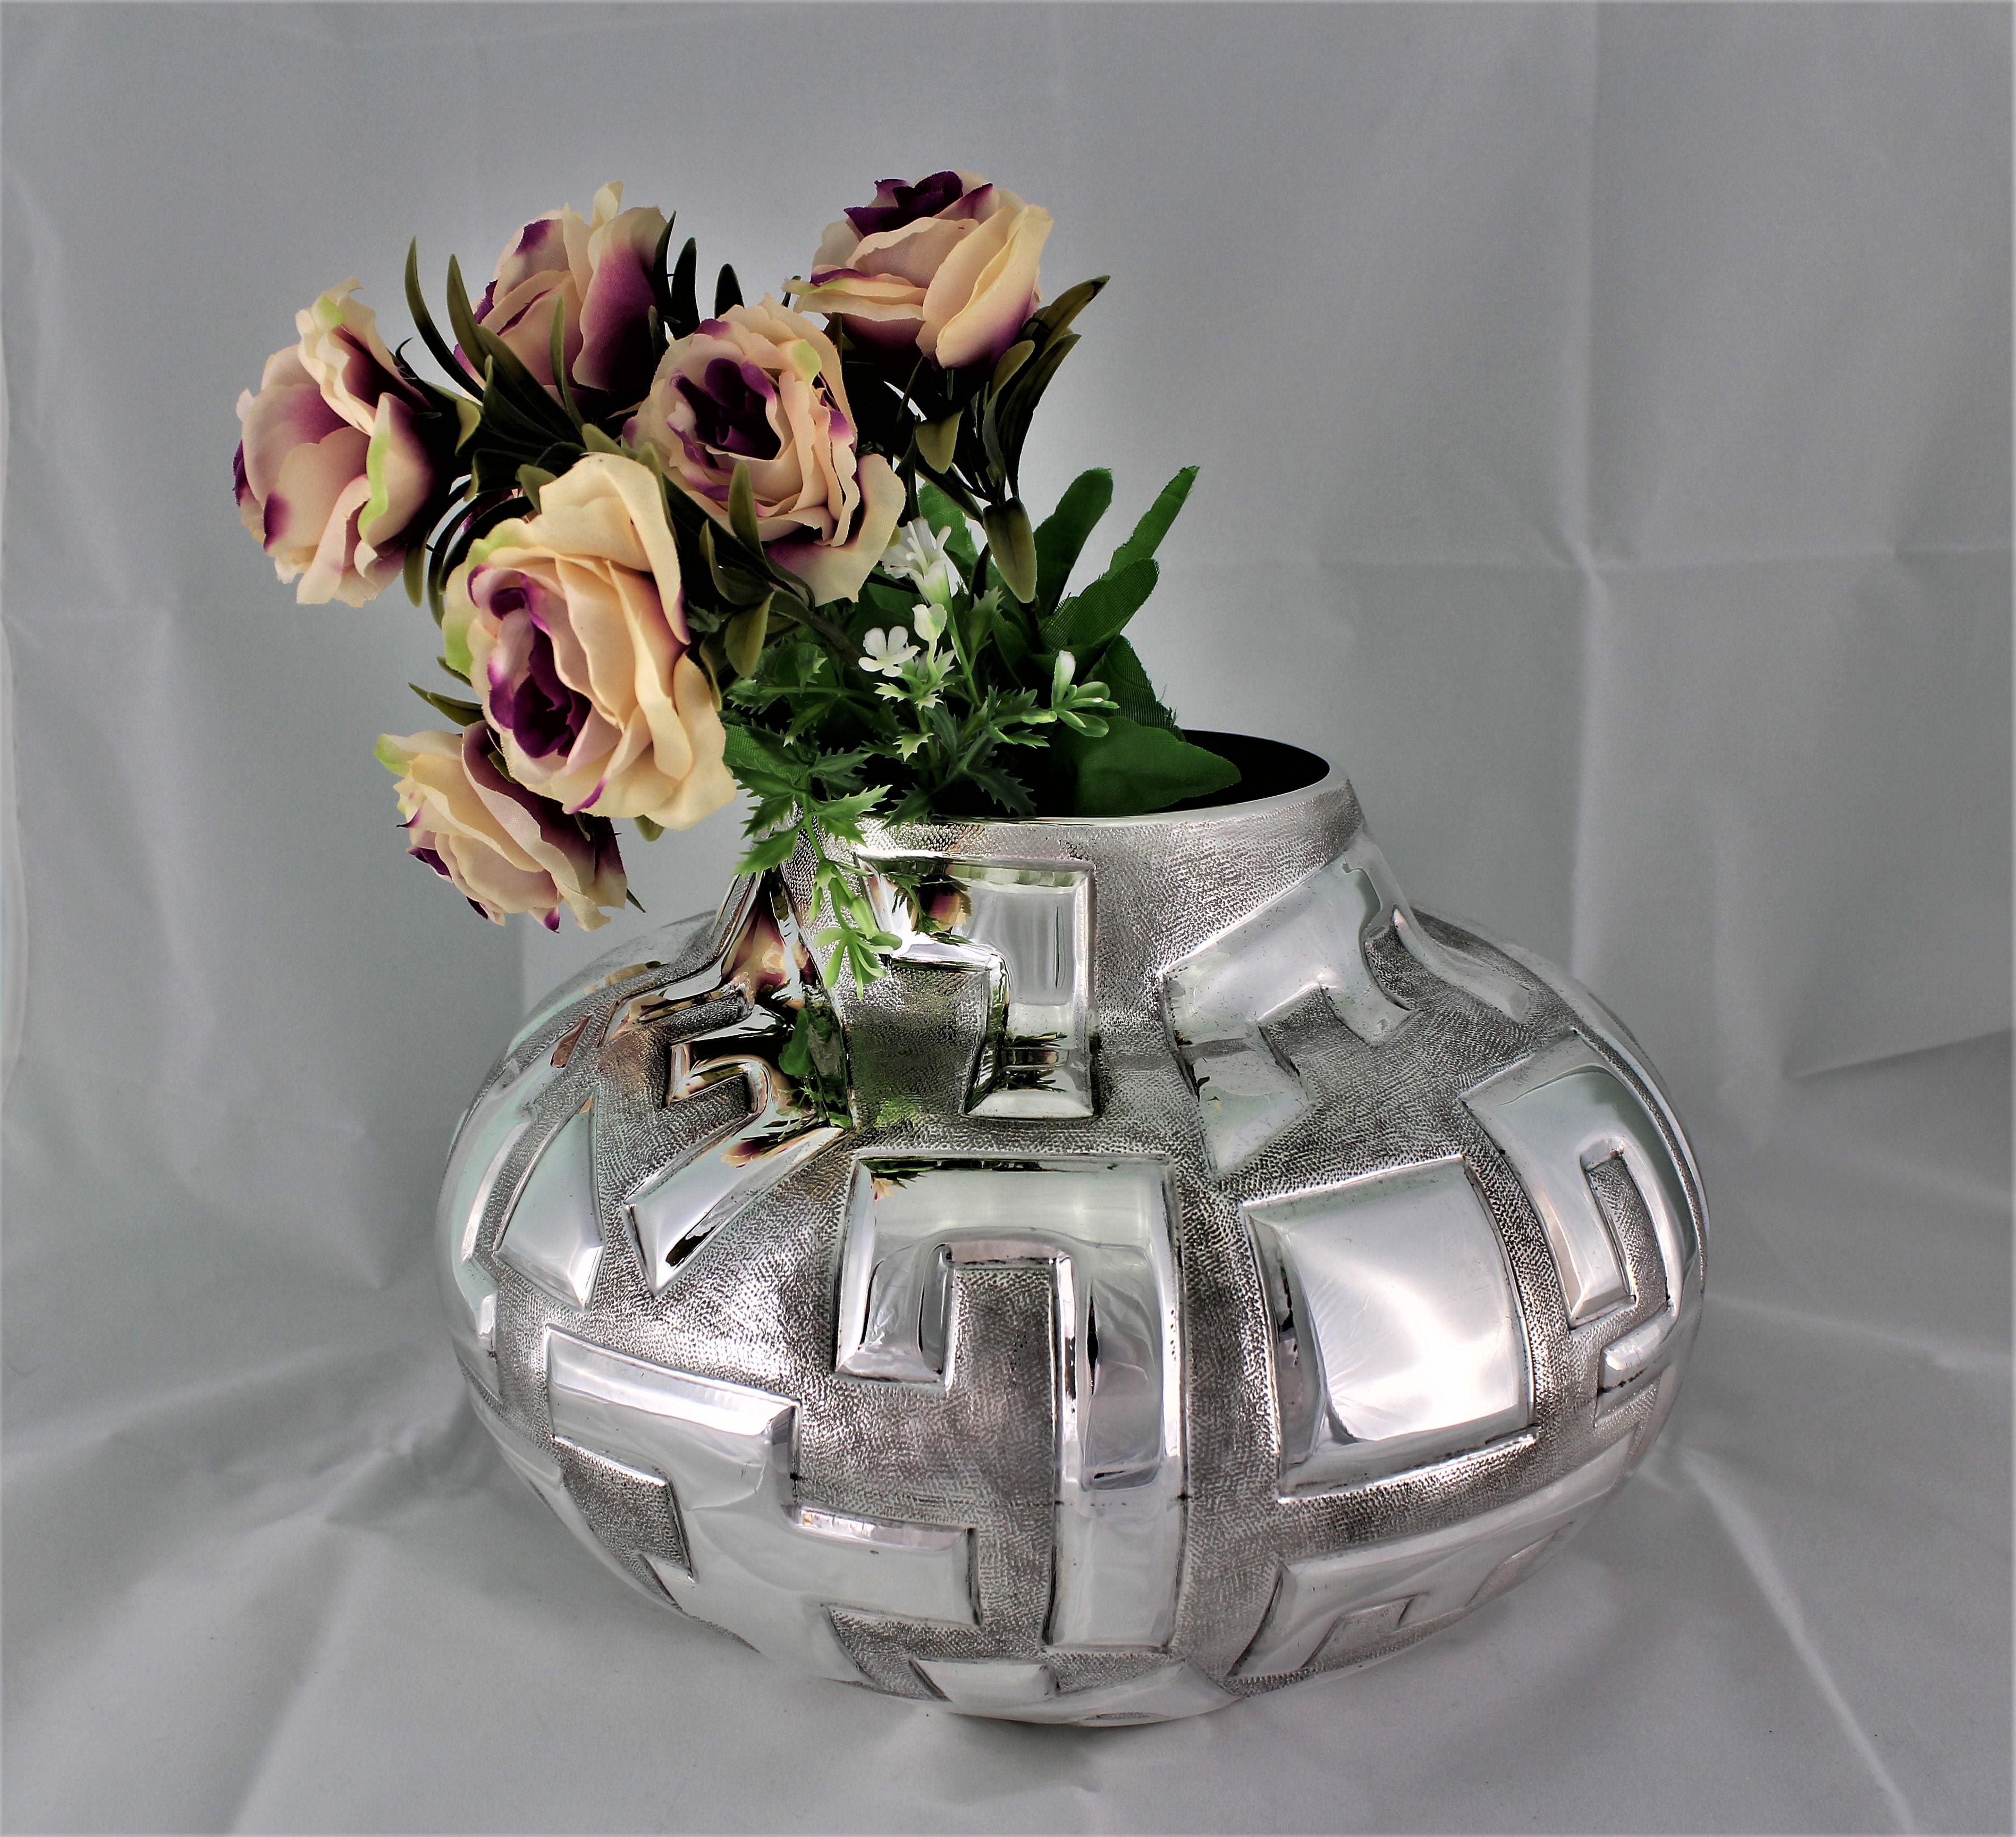 Futurist engraved silver flower vase realized circa 1930s.

Futurist design derived from the trend of that period, realized by Umberto Gheduzzi from Verona, Italy.

Hallmarked silver 800/1000. Maker's mark with the fasciscm axe used in Italy